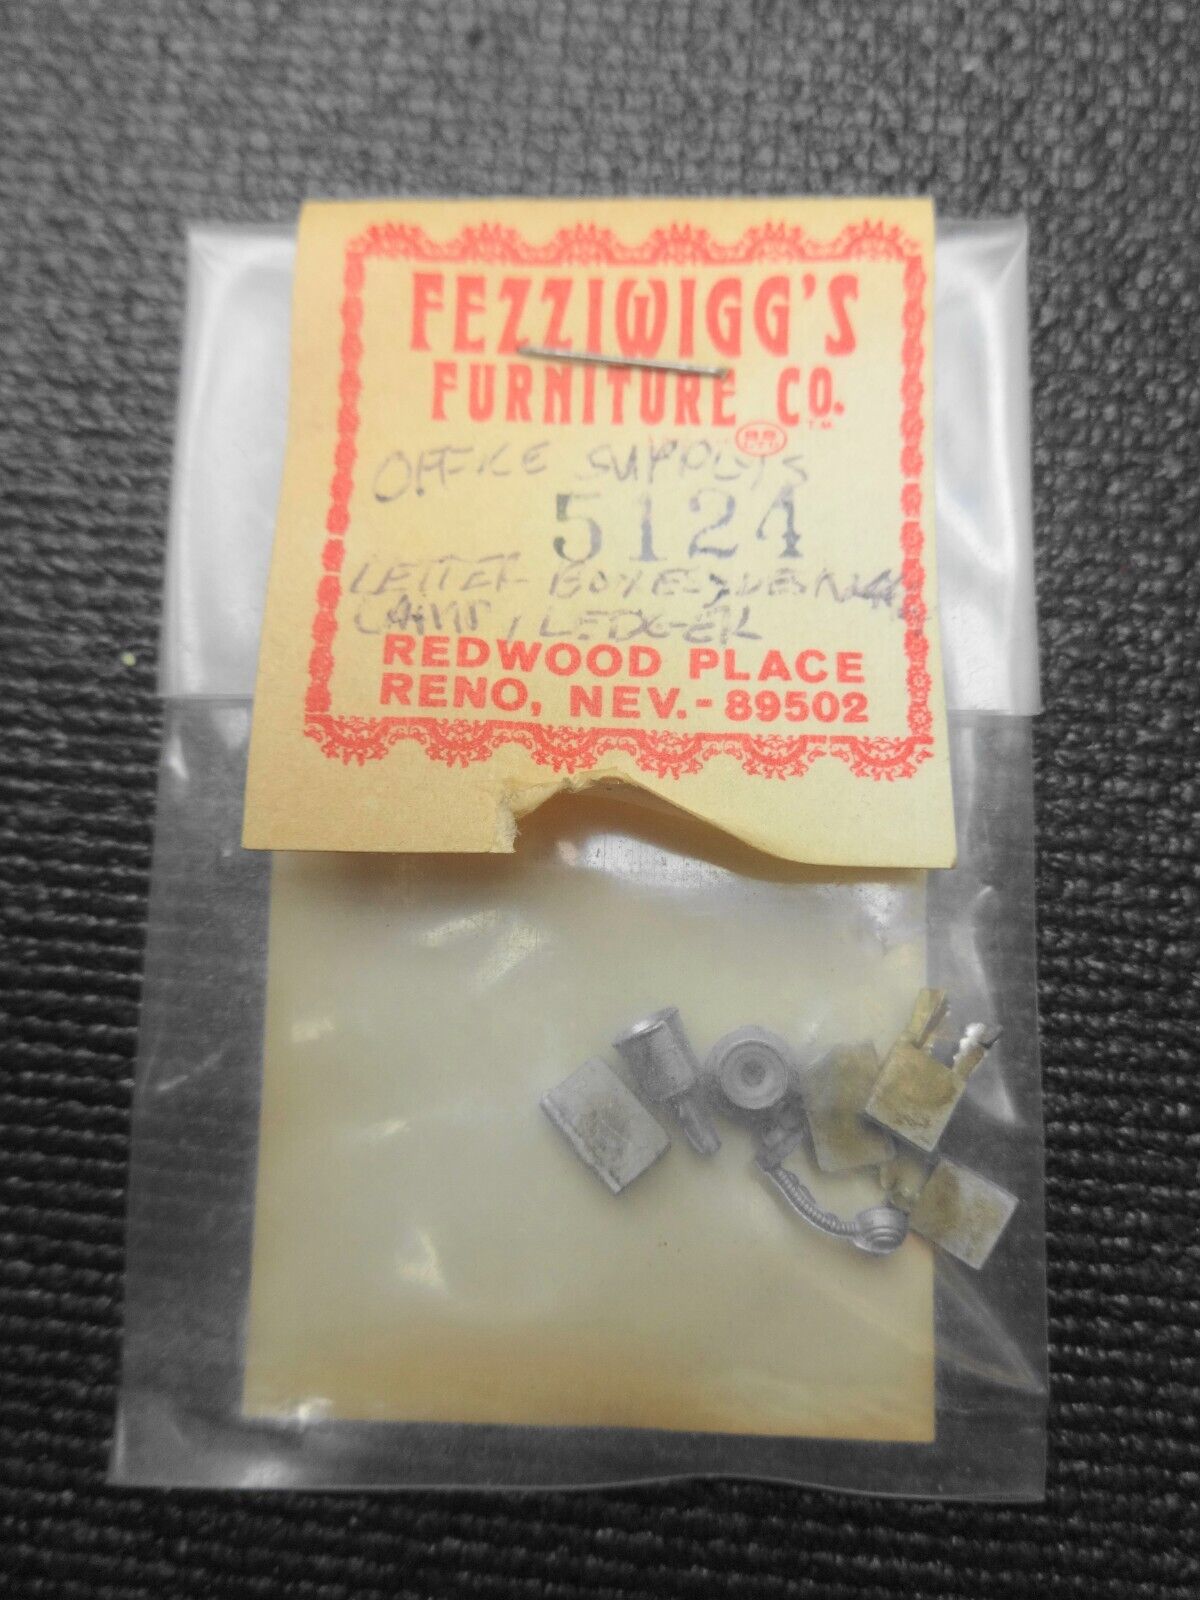 Vintage Fezziwigg's Furniture Co HO - Office Supplies - Diecast 5124 NOS